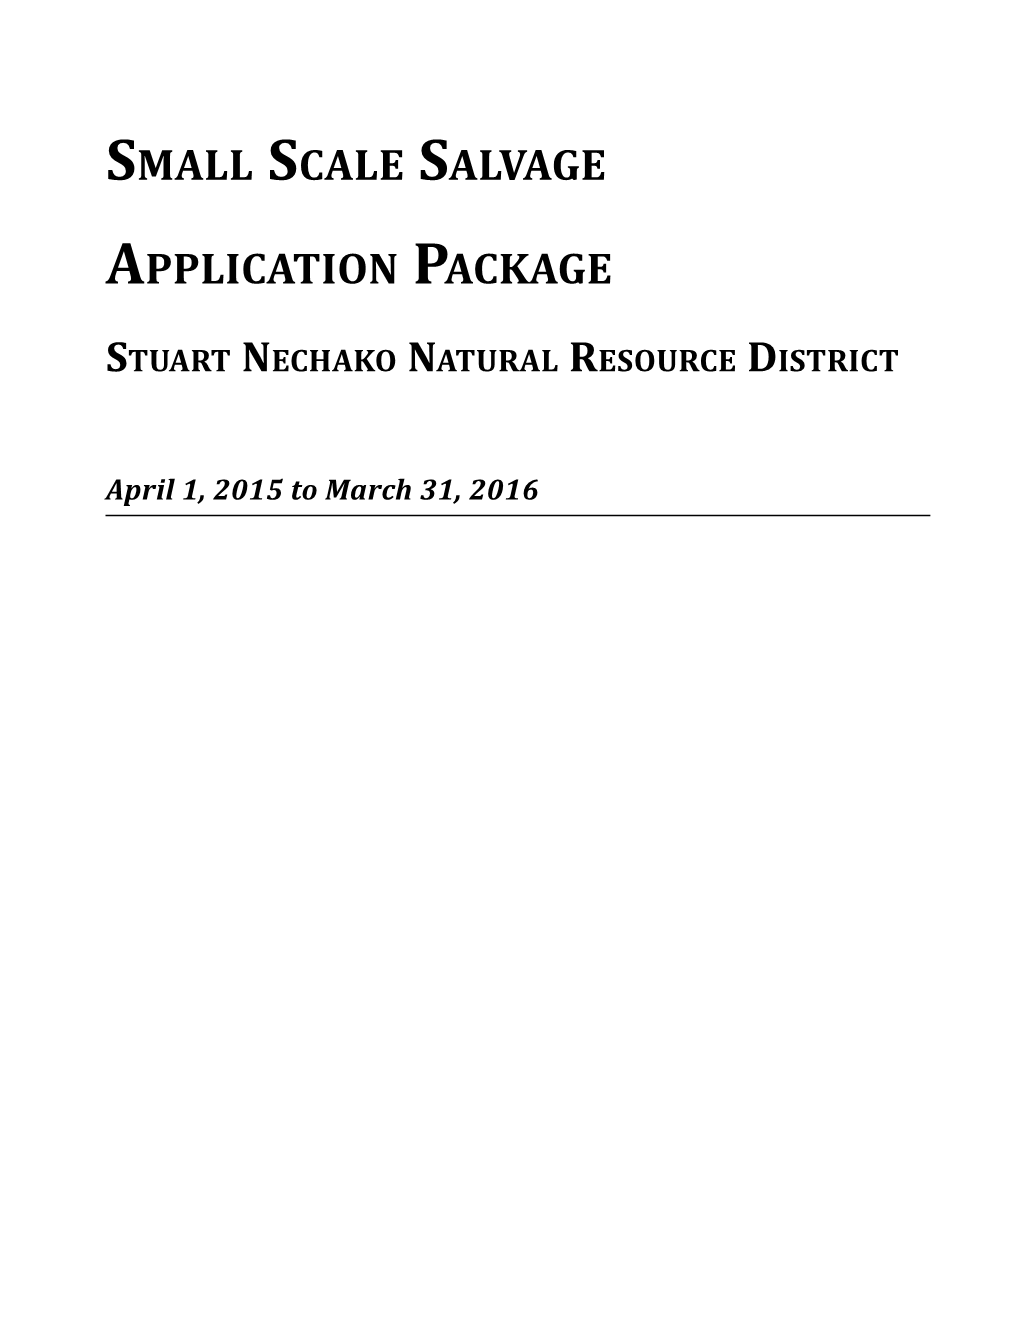 Small Scale Salvage Registration Form 4